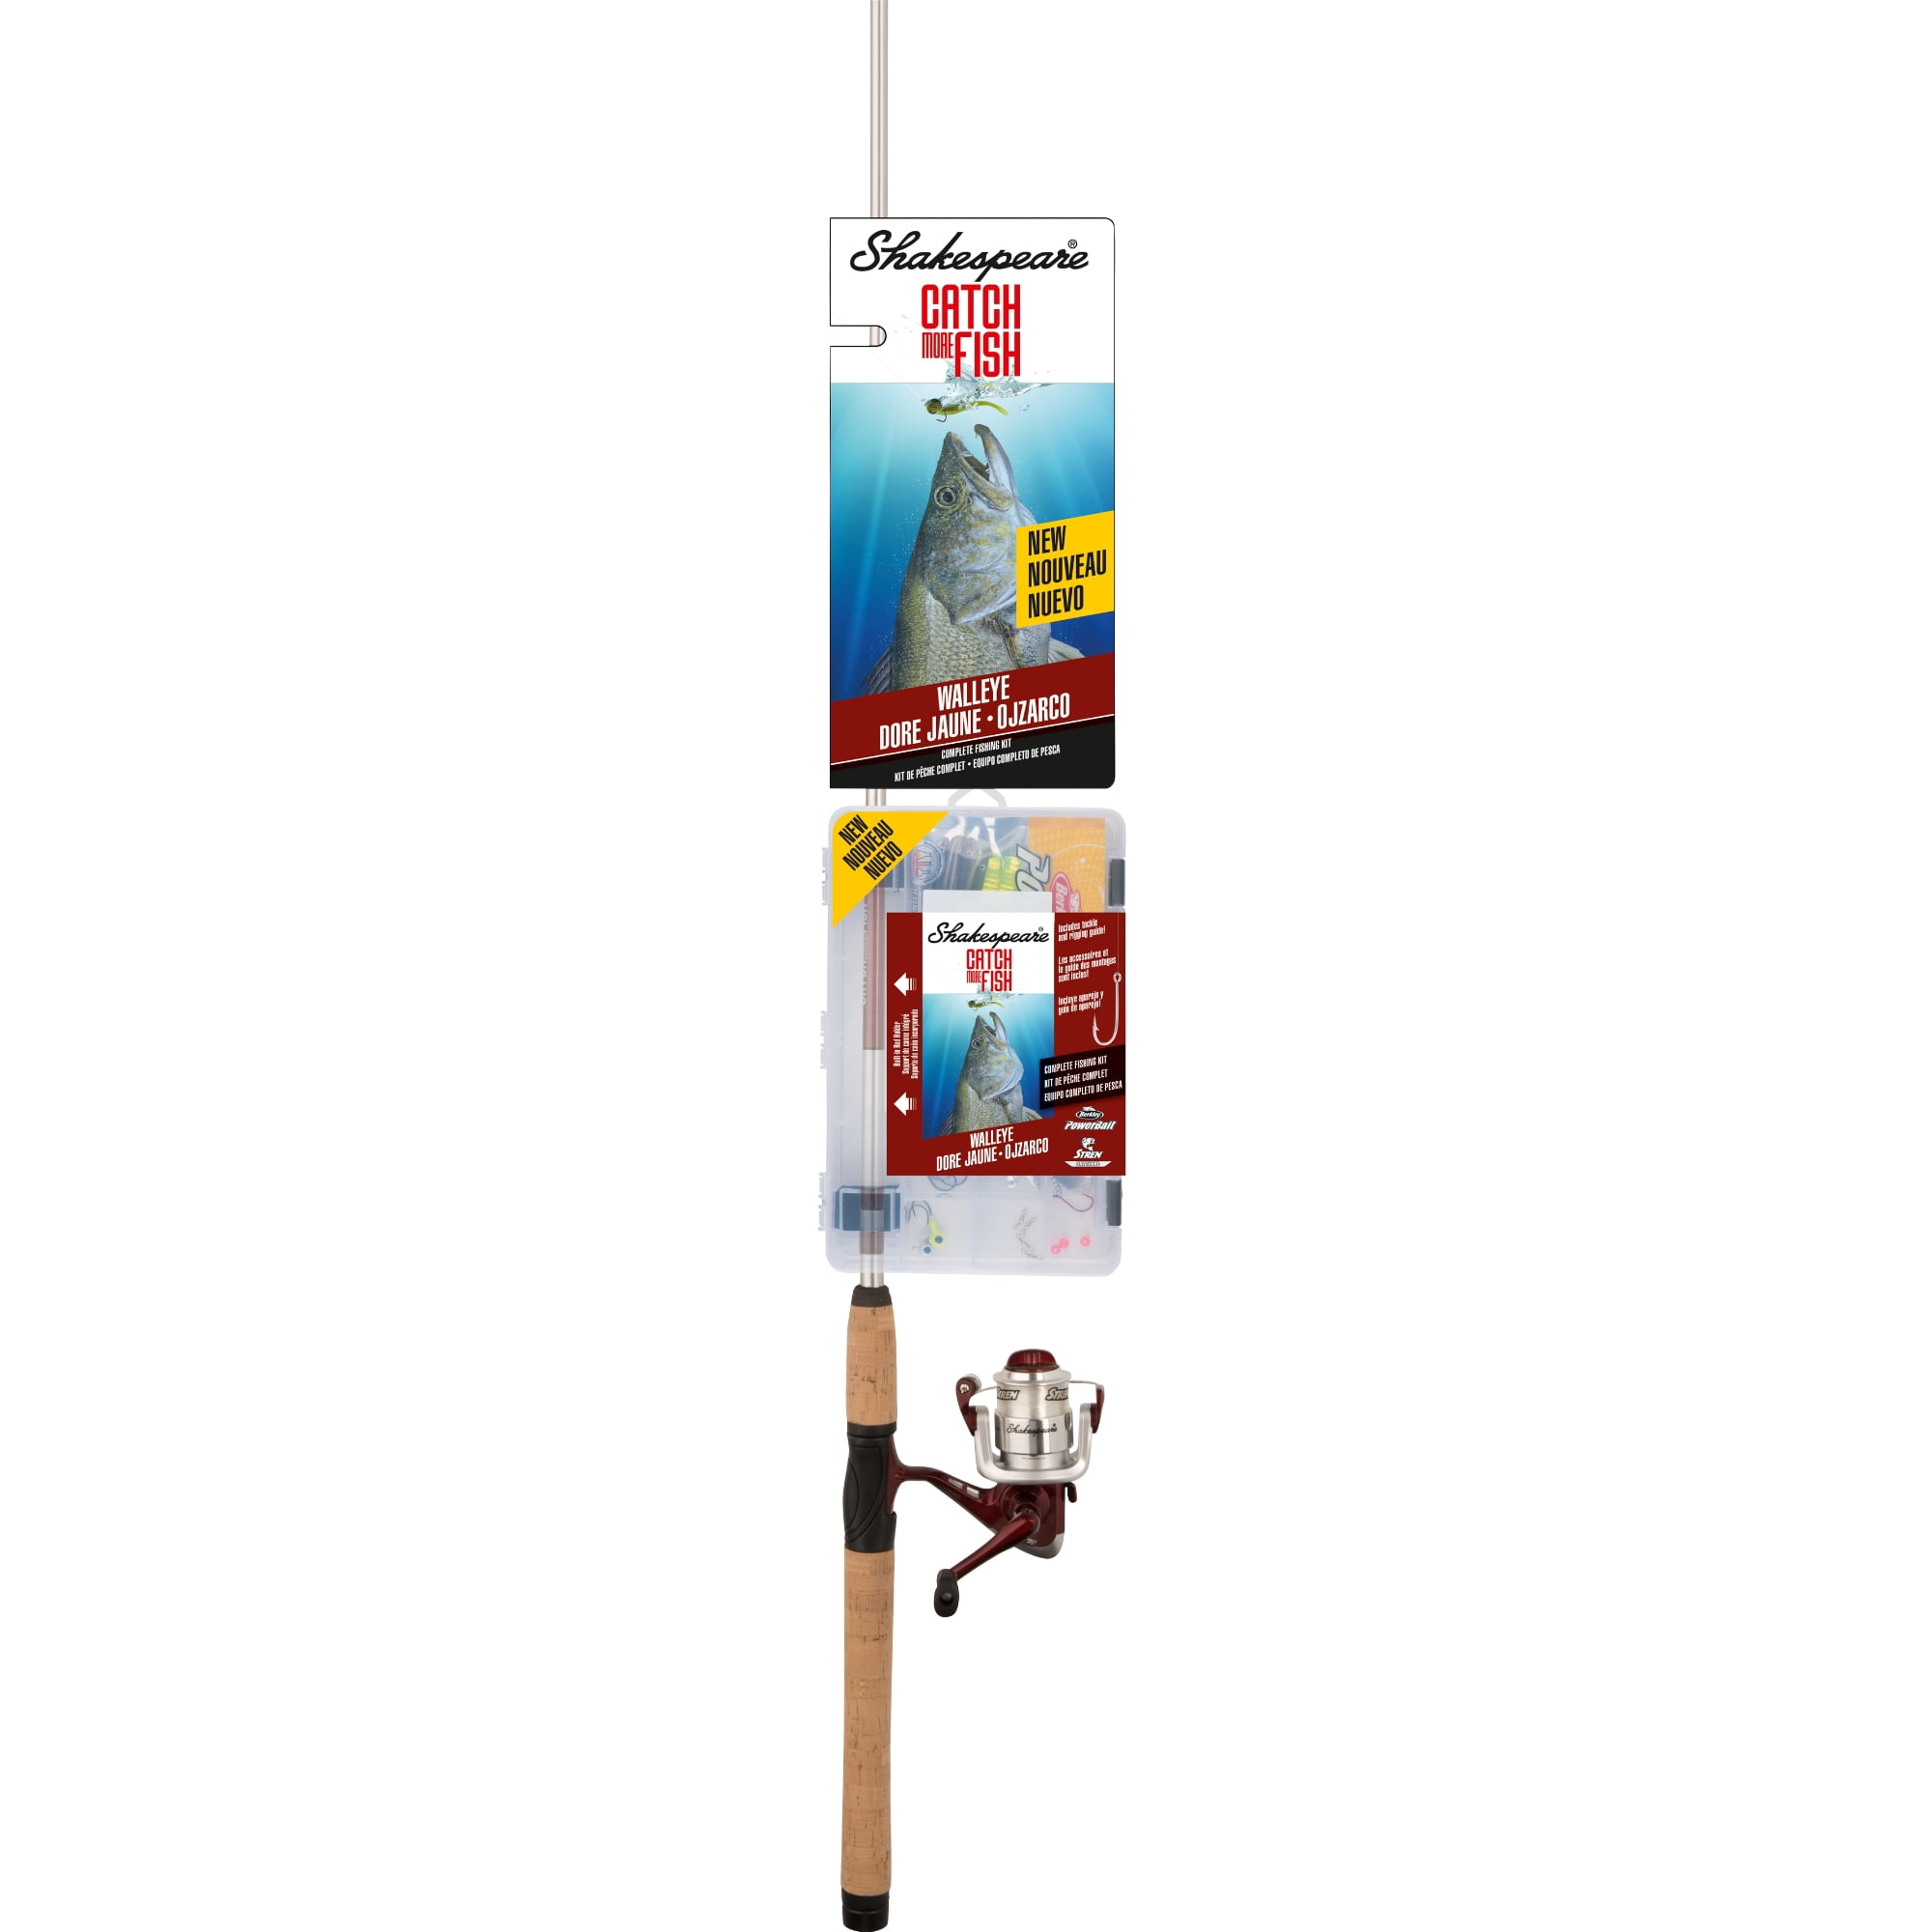 Rod Cat Toy Pulley Telescopic Fishing Rod Cat Toy Manual Reel